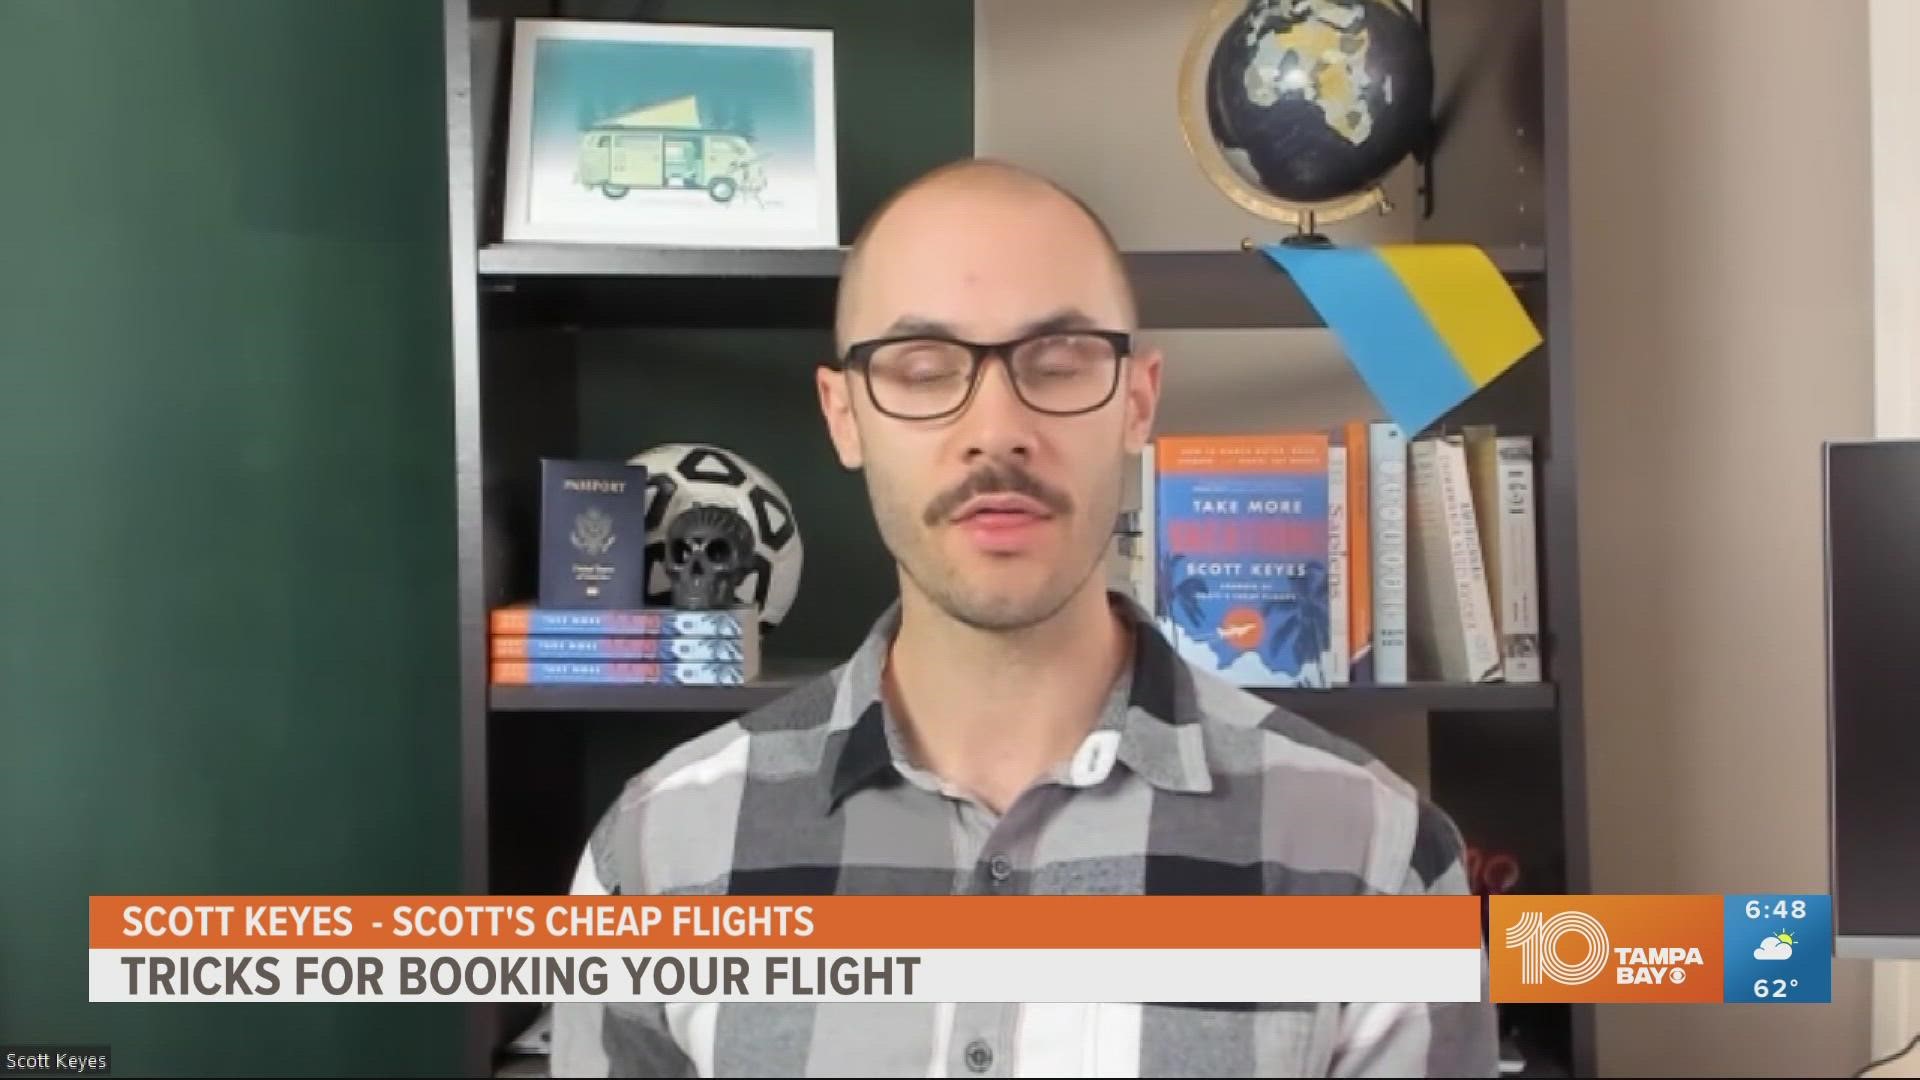 Scott's Cheap Flights recommends booking at least 21 days in advance.